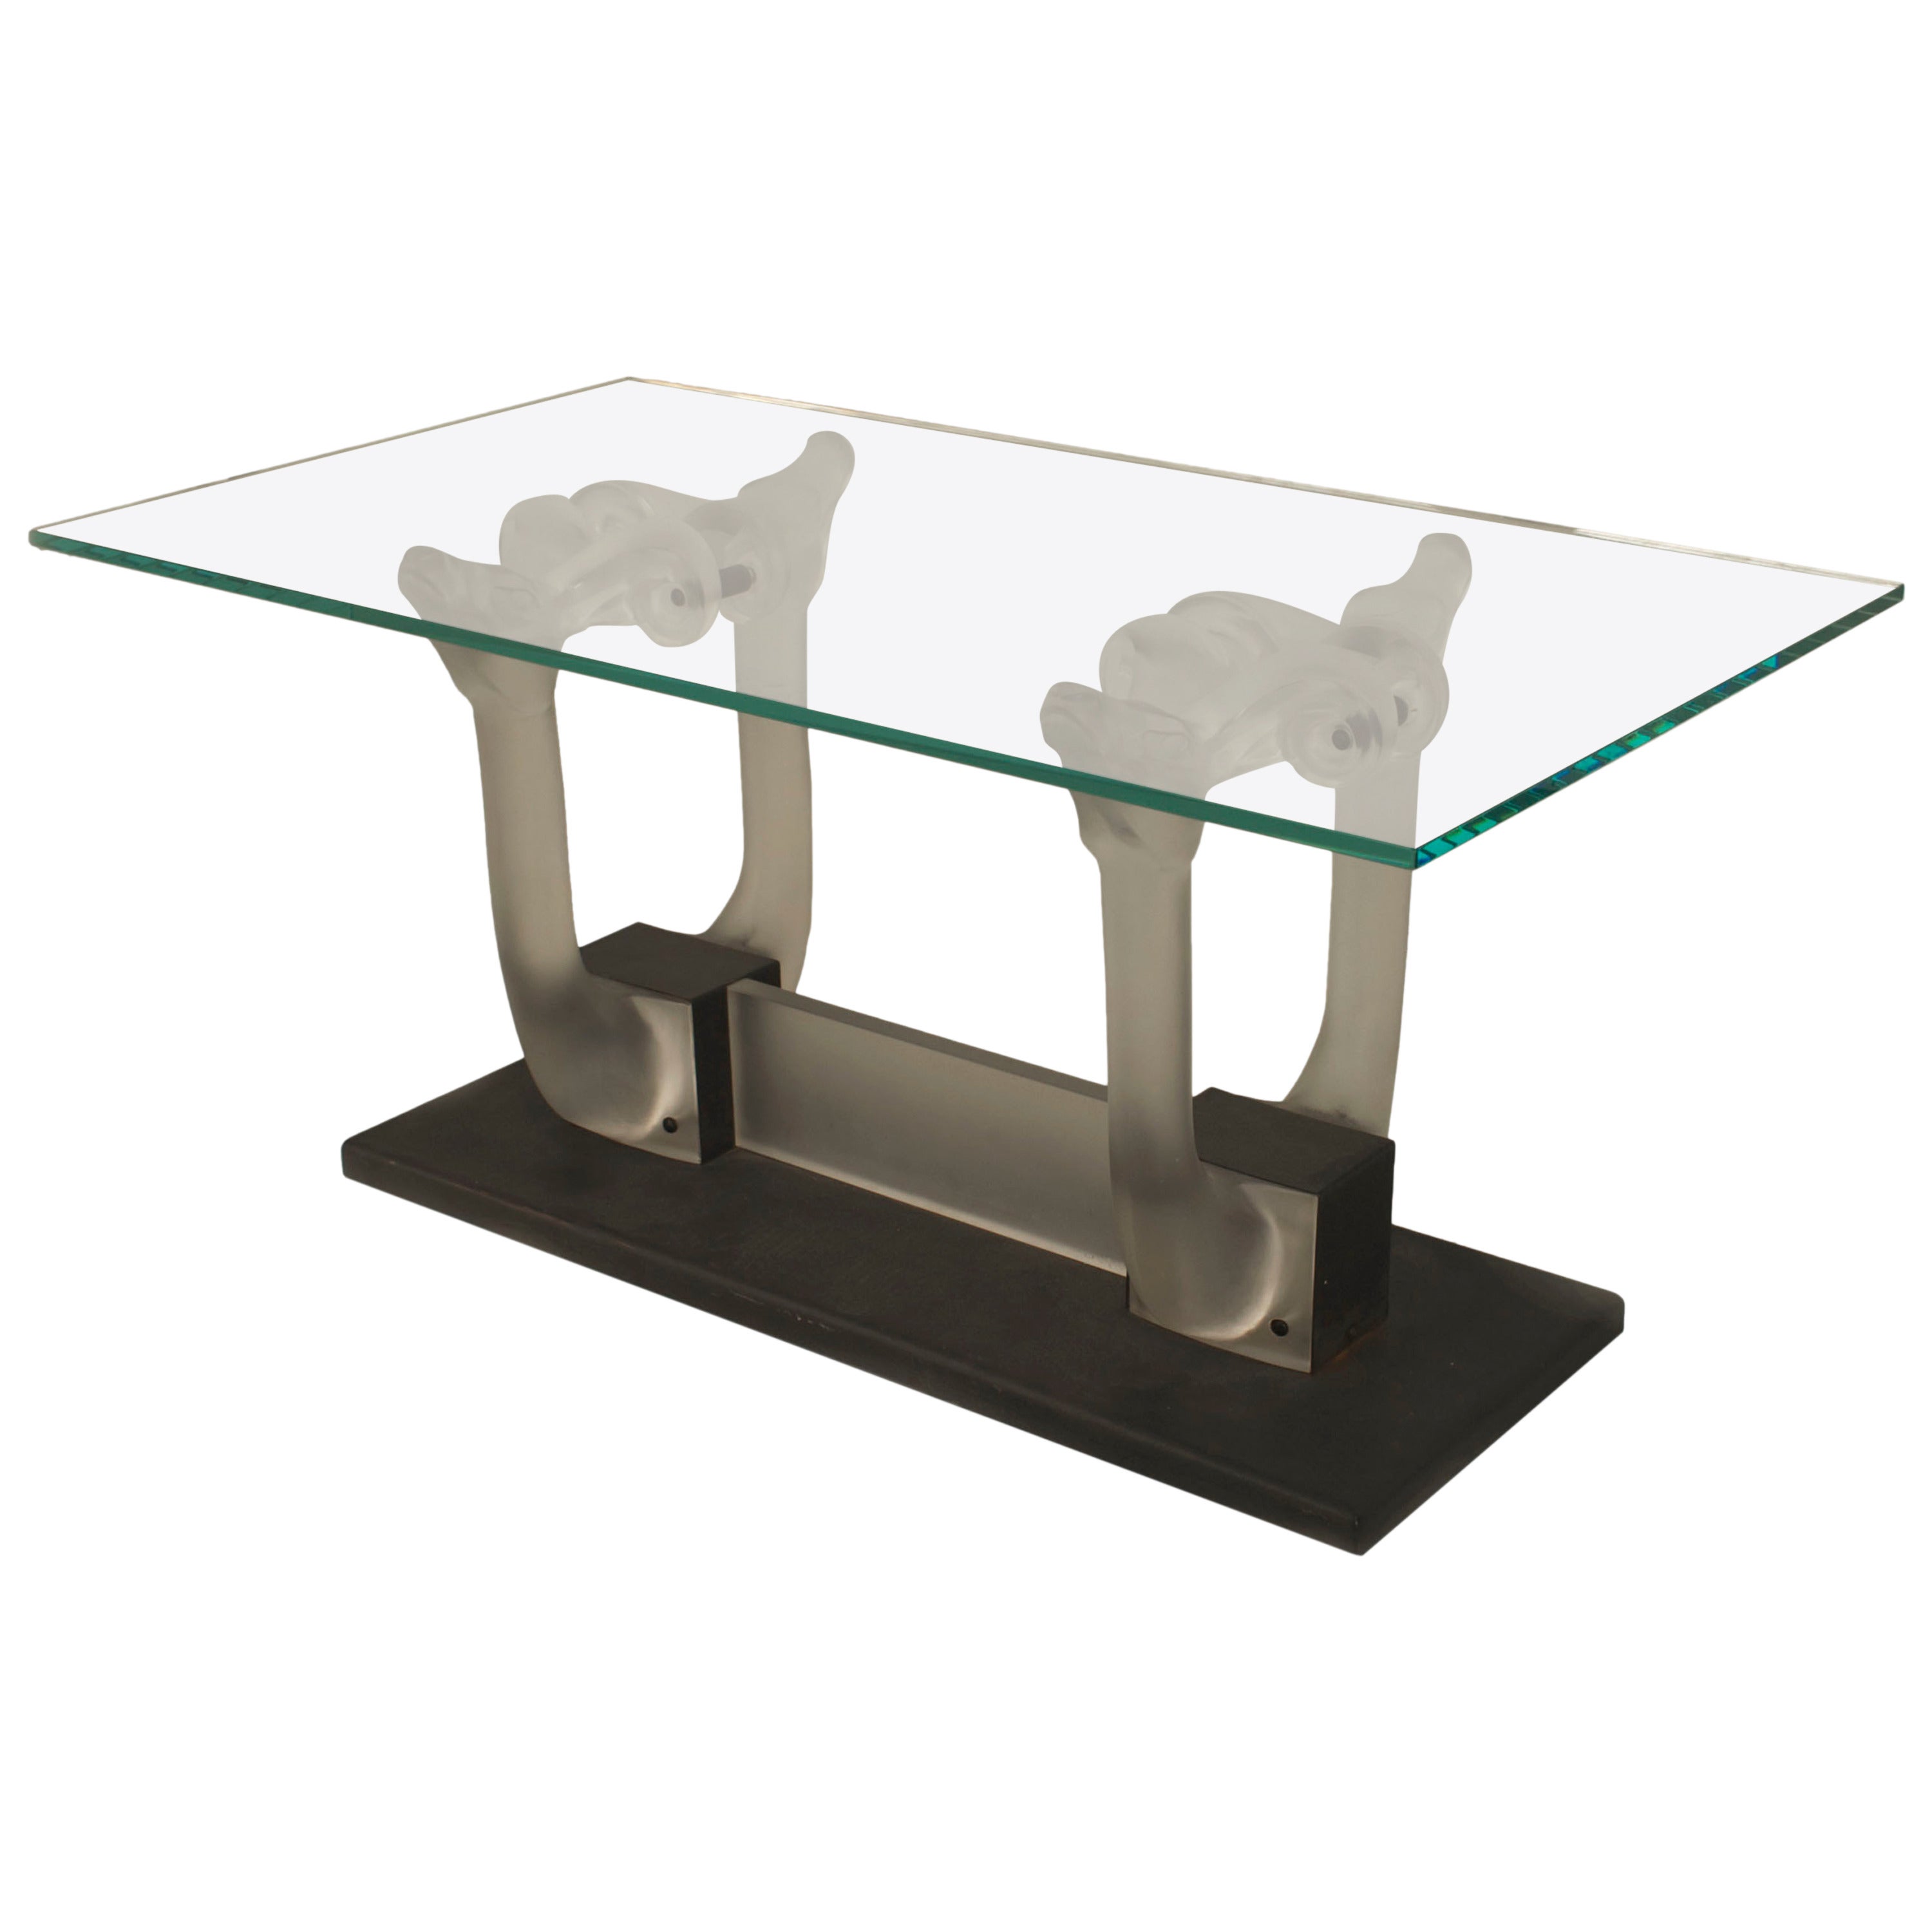 Lalique Molded Glass 'Moulfon' Table, Designed by Marc Lalique, circa 1975